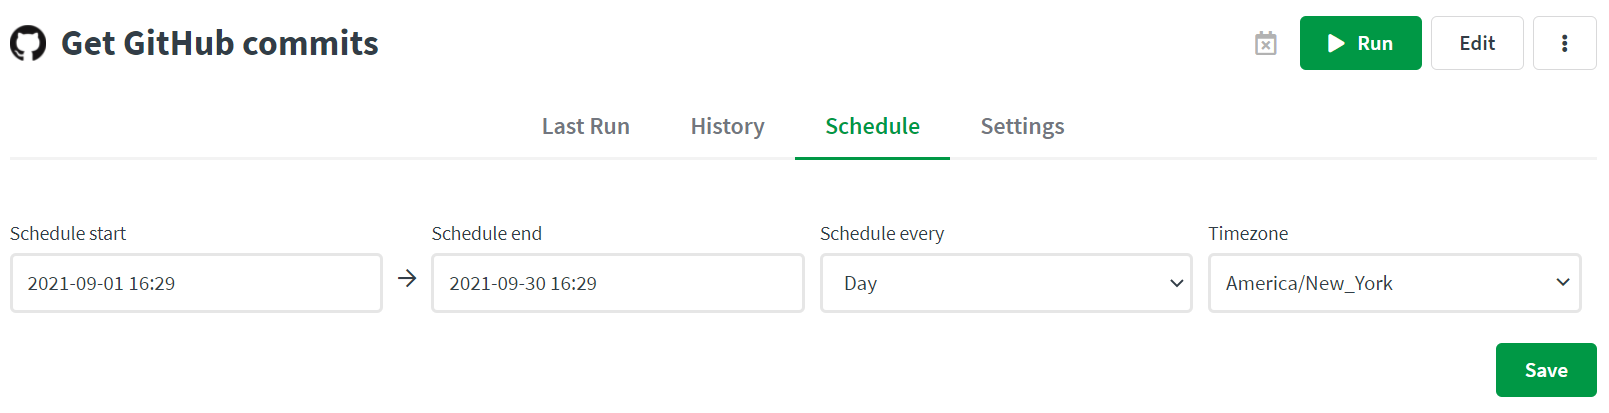 The schedule configuration from the Overview section